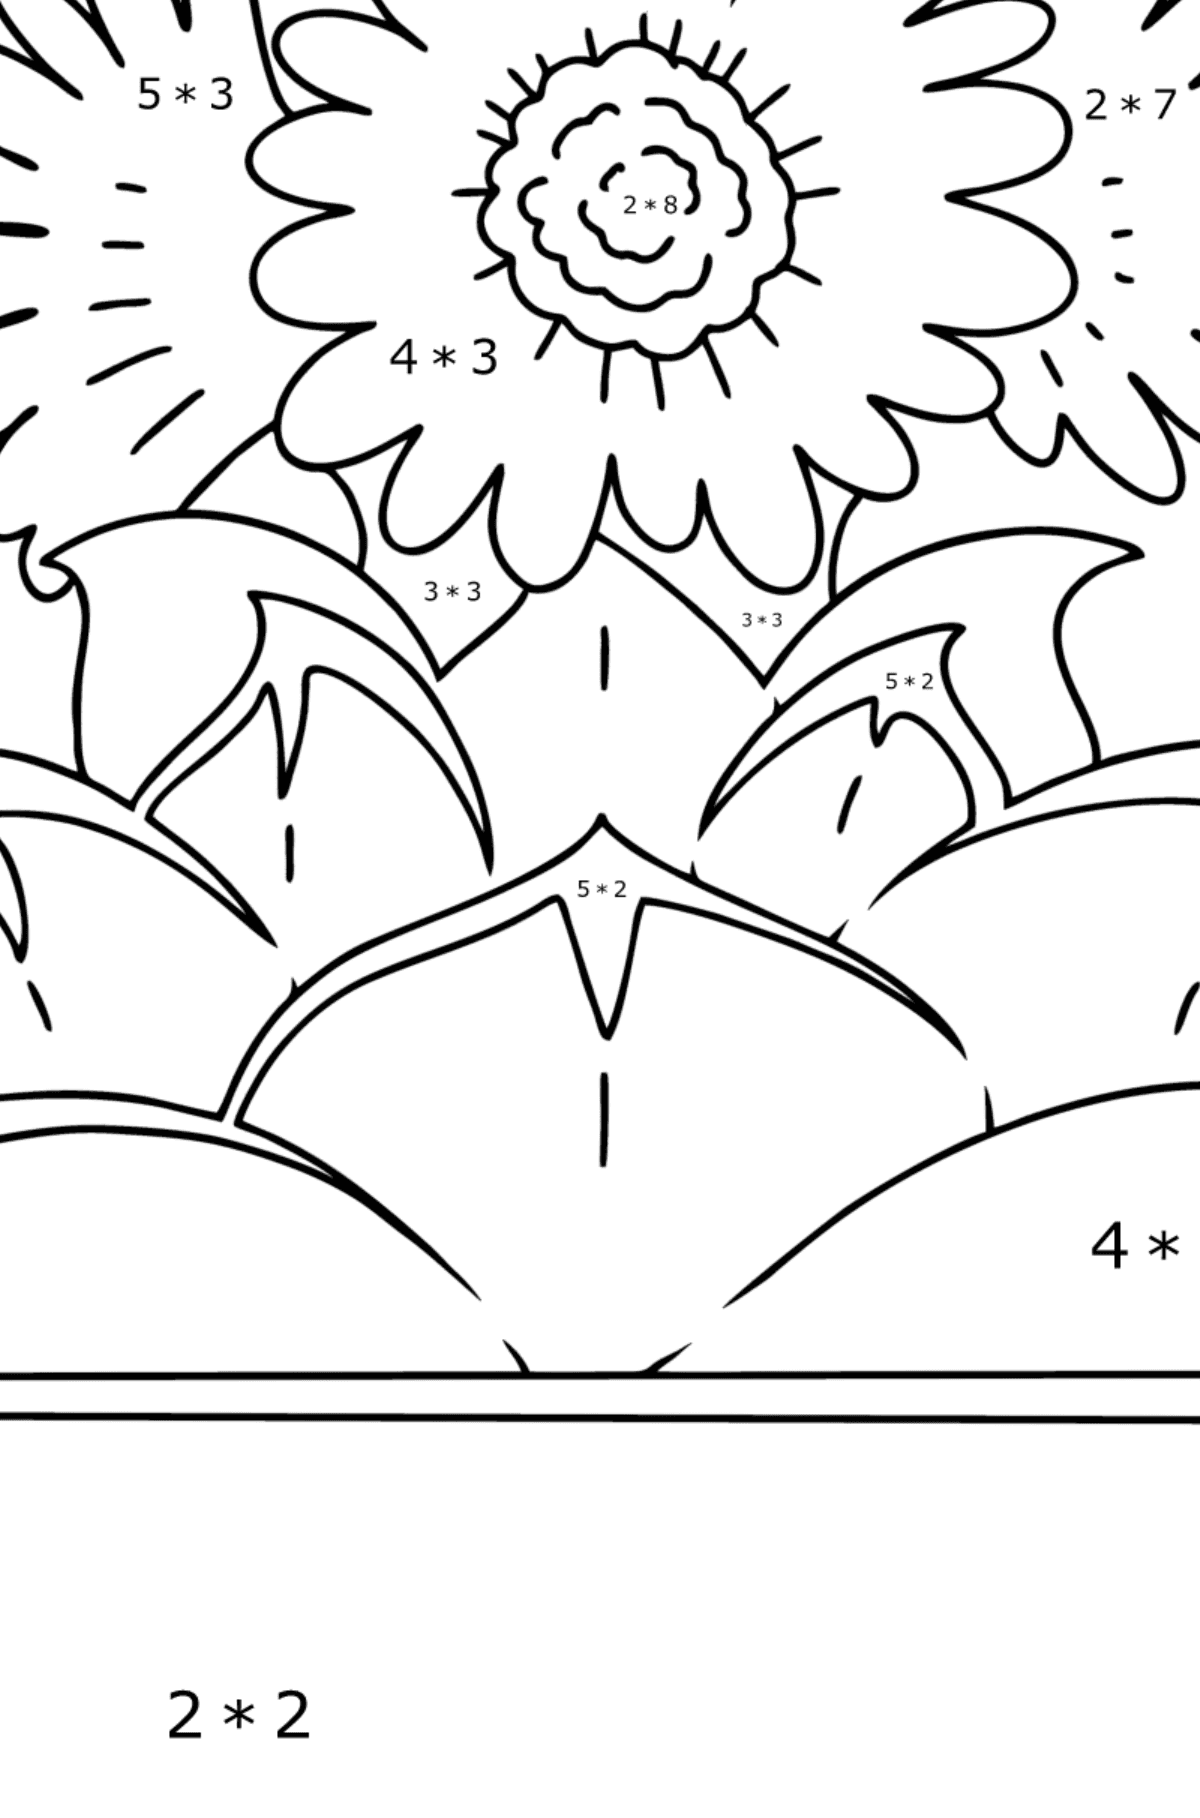 Echinocactus Grusonii coloring page - Math Coloring - Multiplication for Kids